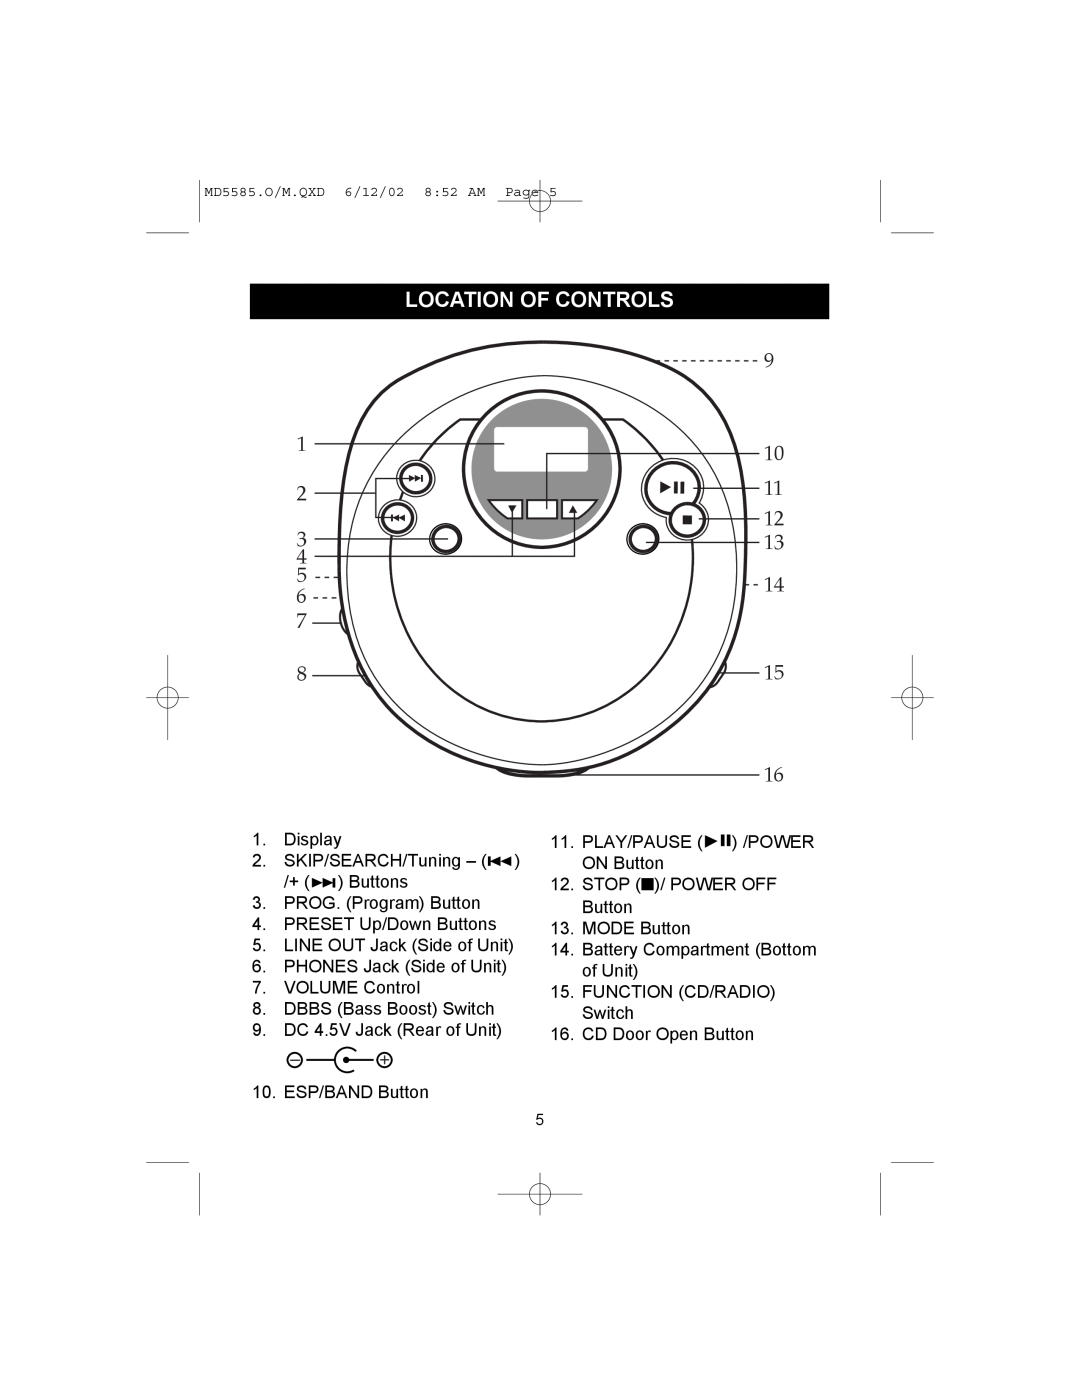 Memorex MD5585 operating instructions Location Of Controls, 1 2 3 4 